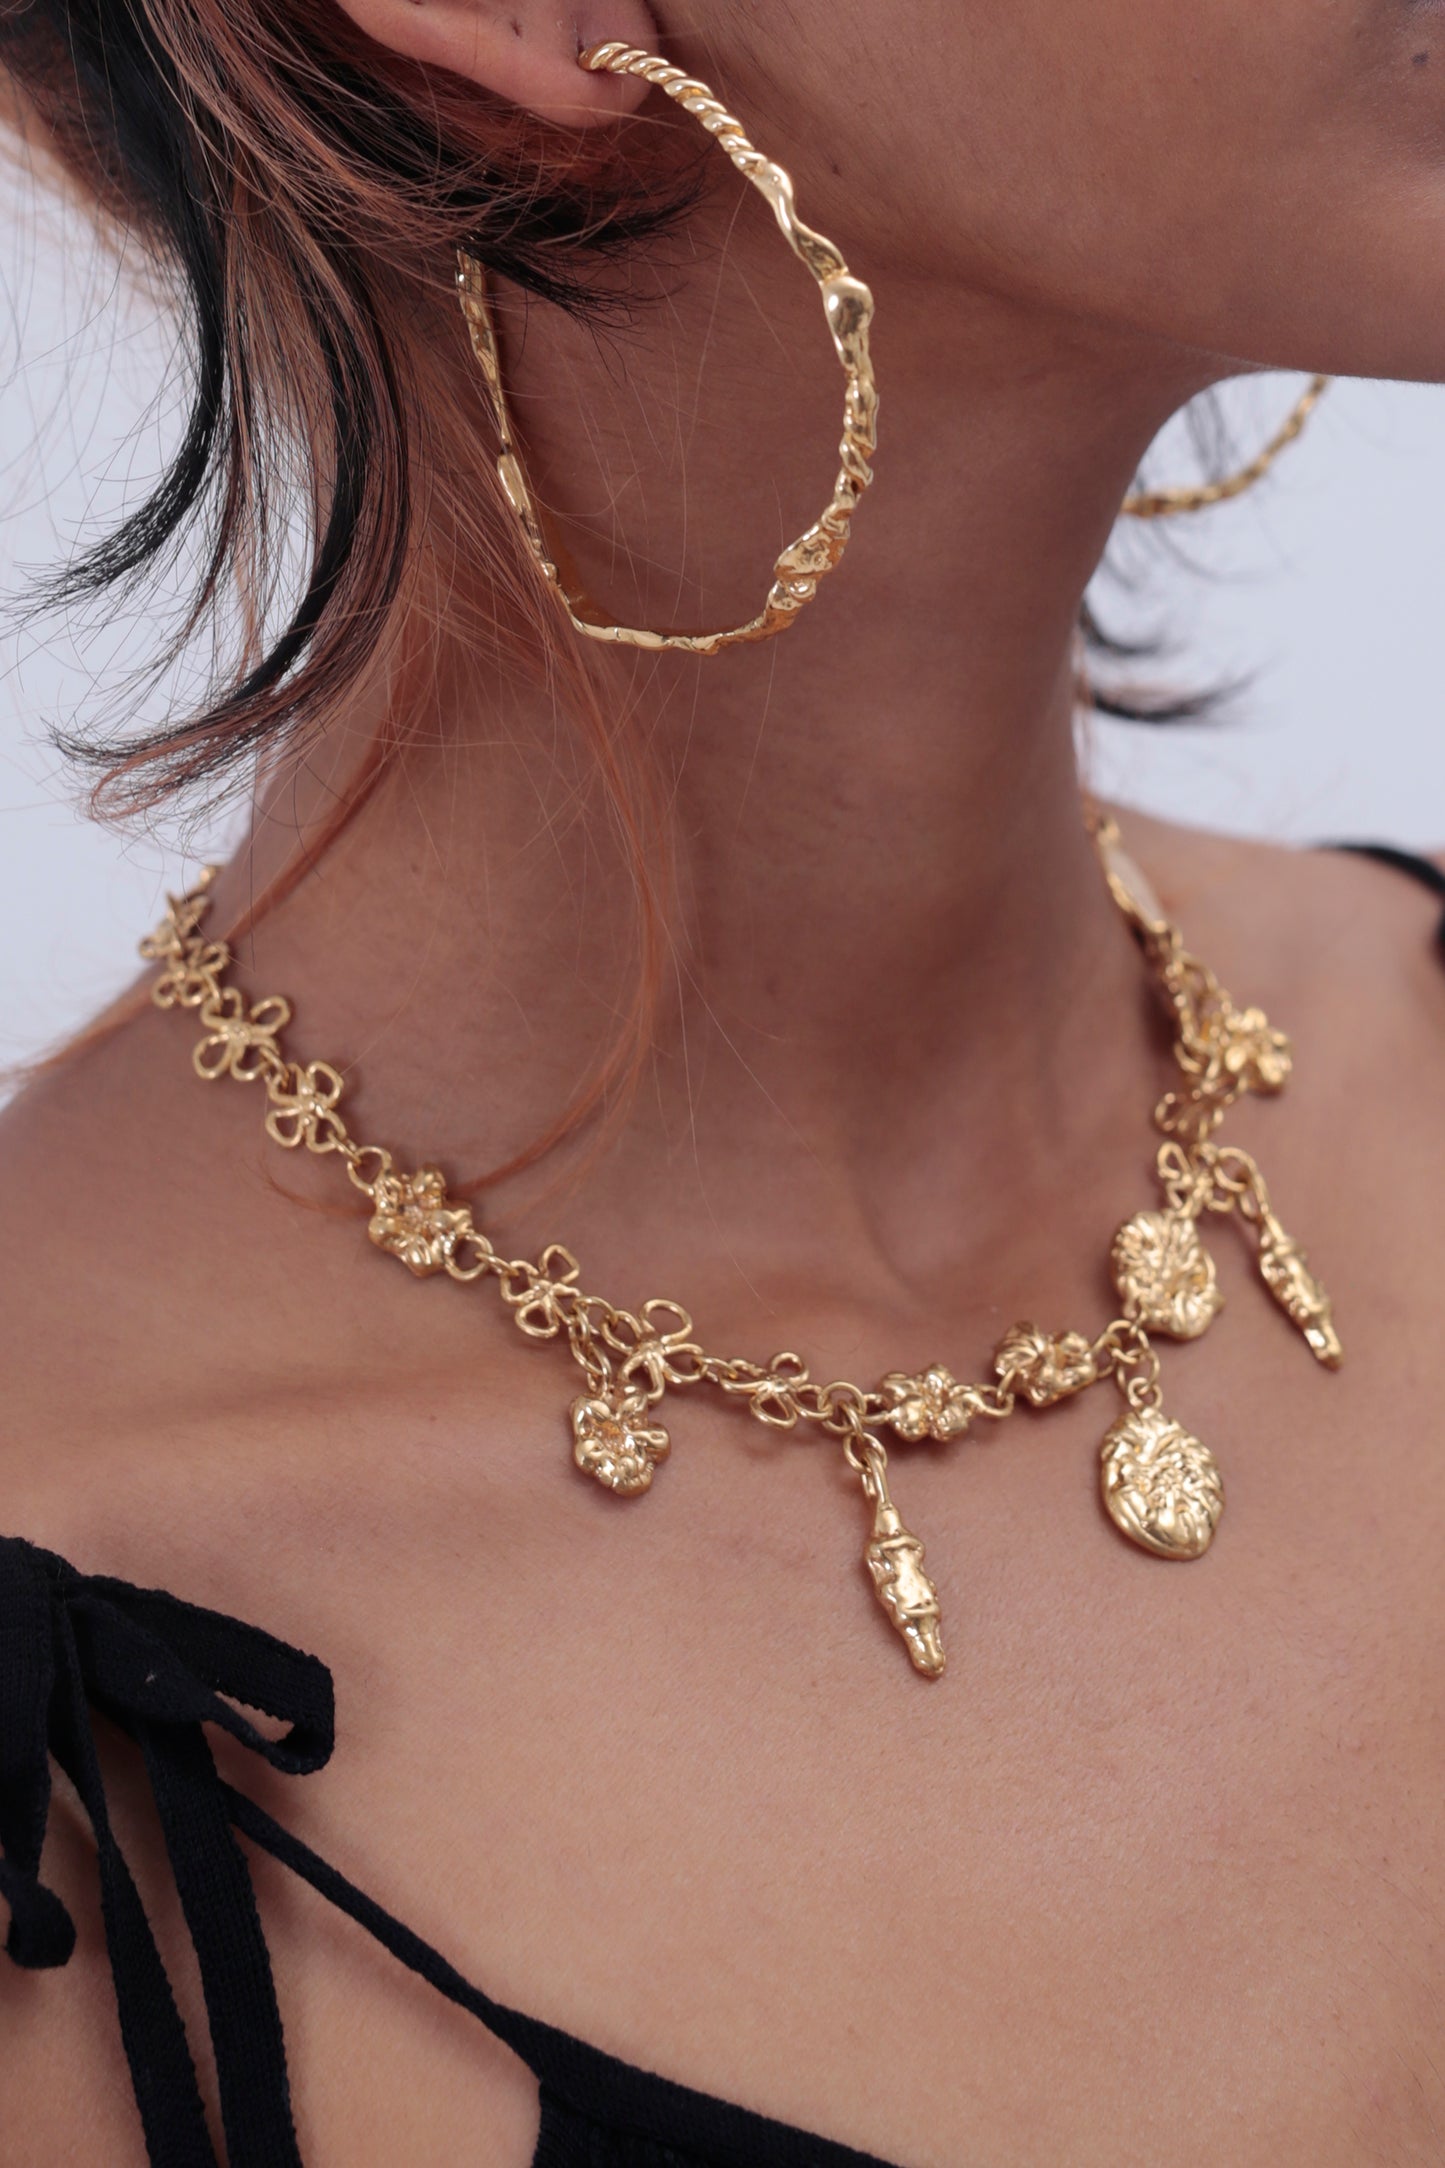 CLARK Earthly Delights Necklace on model. Four 18K Gold Vermeil charms hang off delicately around the models neck. She is also wearing Sea Siren Hoop Earrings. These are the perfect occasion jewelry pieces to wear to a wedding, anniversary or special celebration. 